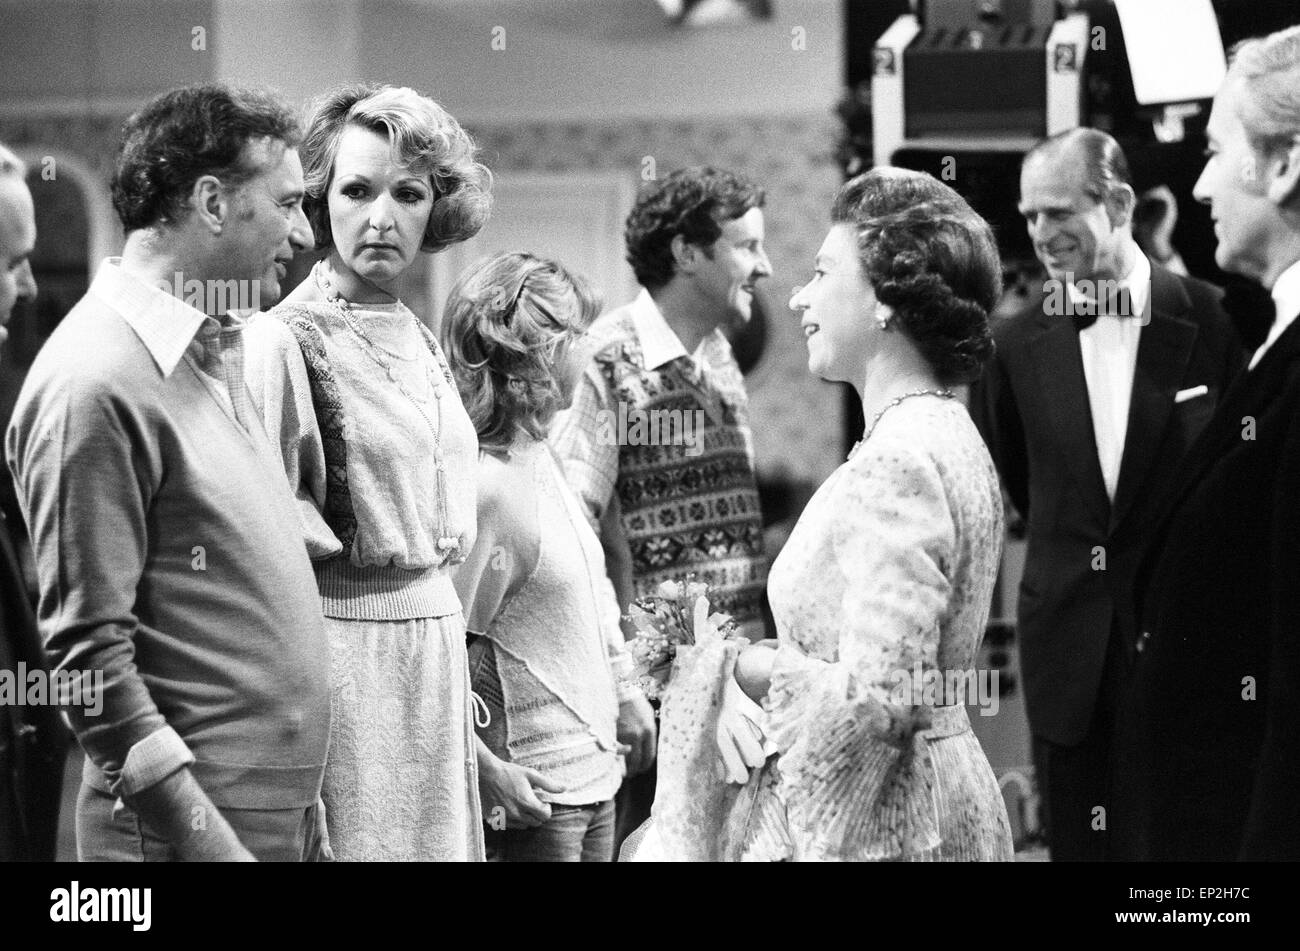 The Queen visits cast and crew on the set of BBC TV Series 'The Good Life', at Television Centre, 8th June 1978. The Good Life comedy team of Felicity Kendal, Richard Briers, Paul Eddington and Penelope Keith, took fitness as the theme for the royal shoe, in which Jerry decides he is not fit enough. Cast : Felicity Kendal plays Barbara Good. Richard Briers plays Tom Good. Paul Eddington plays Jeremy Leadbetter. Penelope Keith plays Barbara Good. Stock Photo